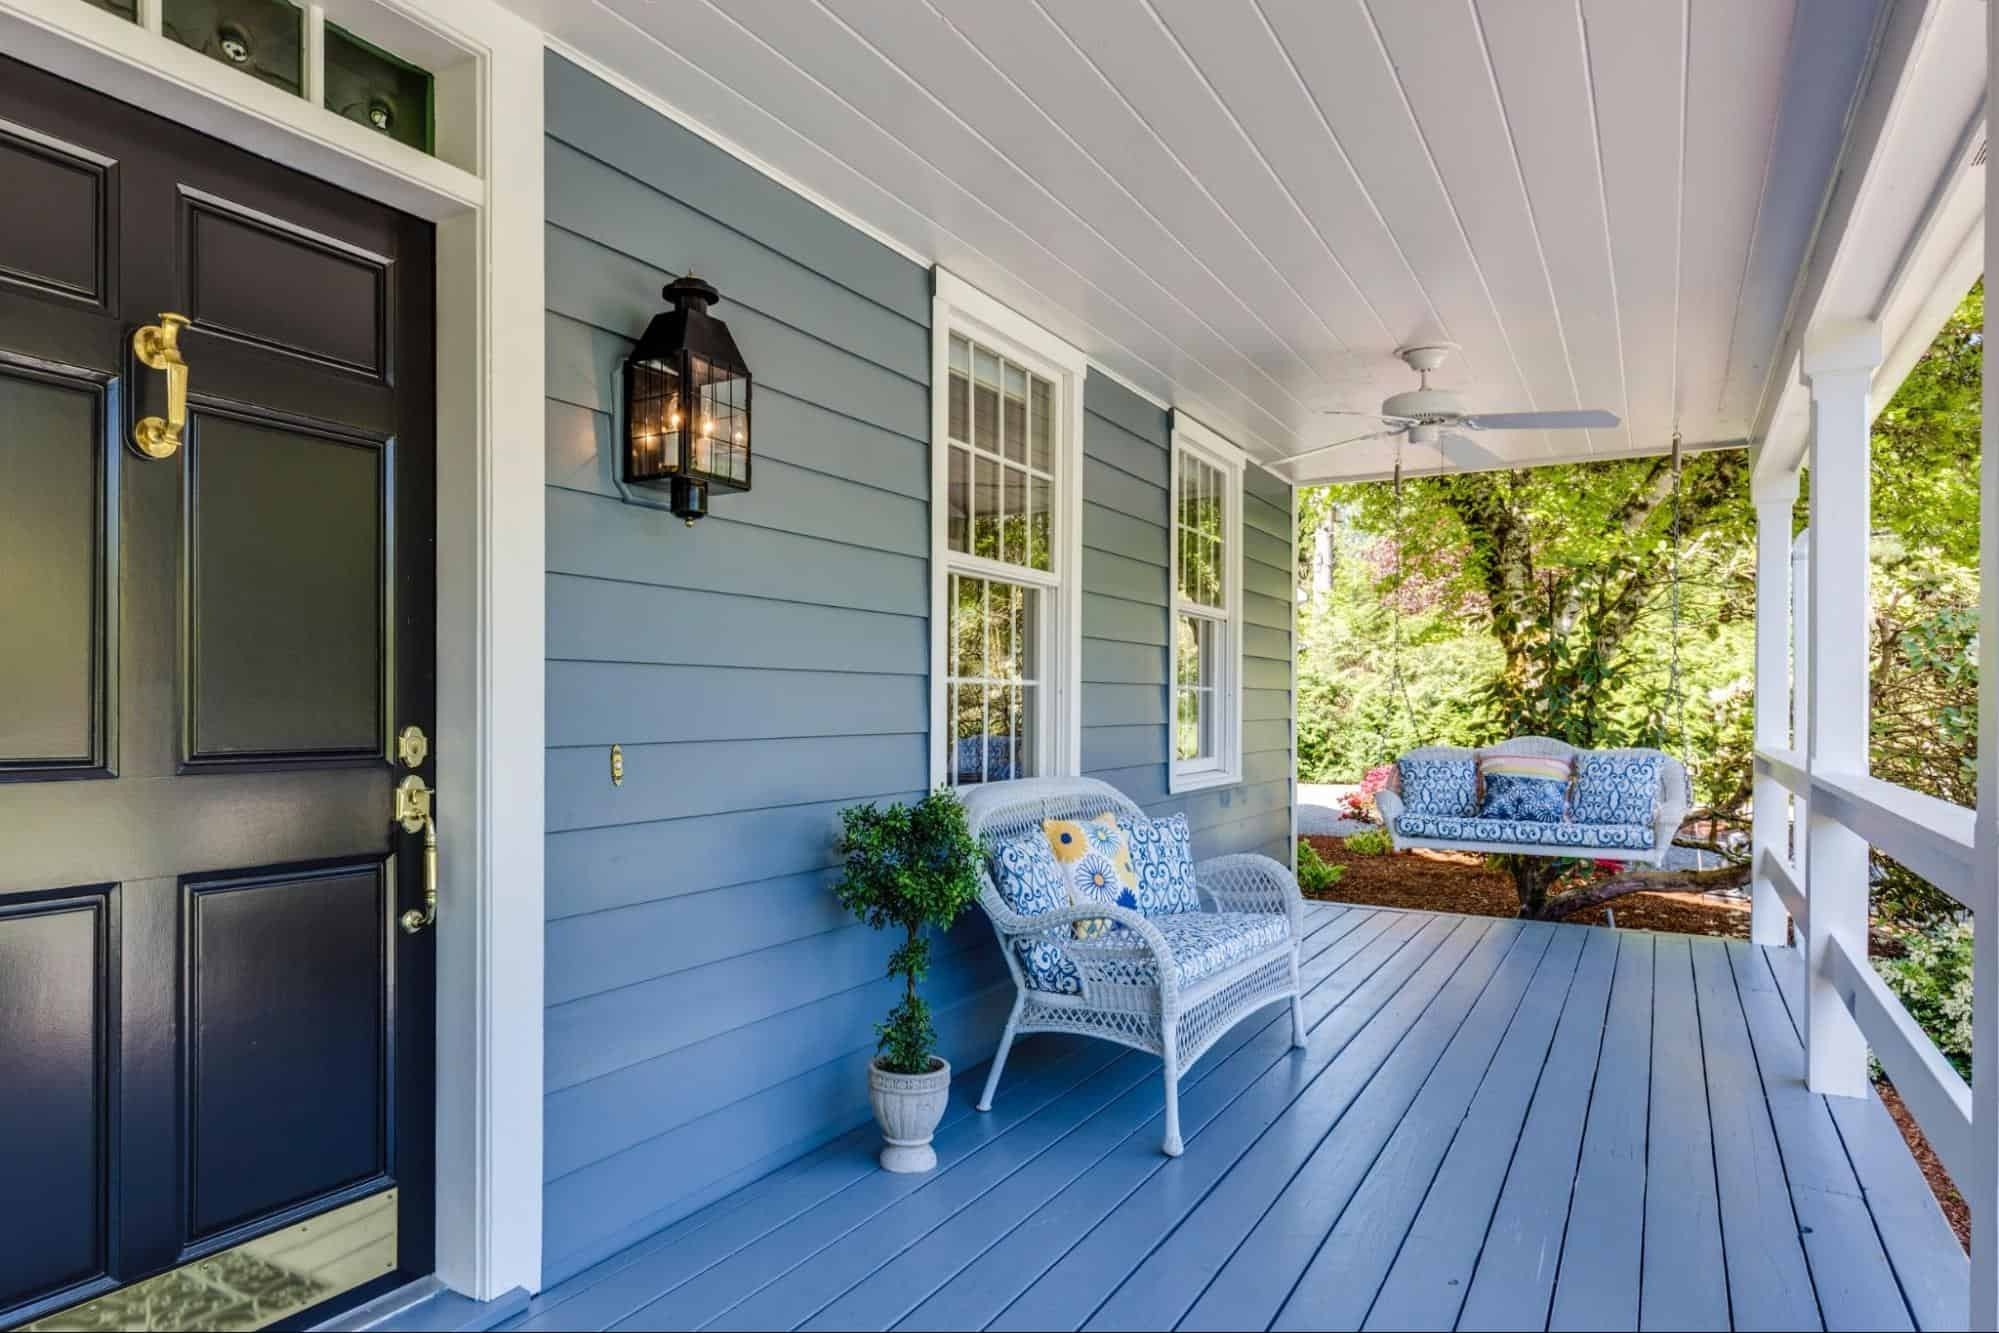 The Best Waterproofing Options for Porch Flooring